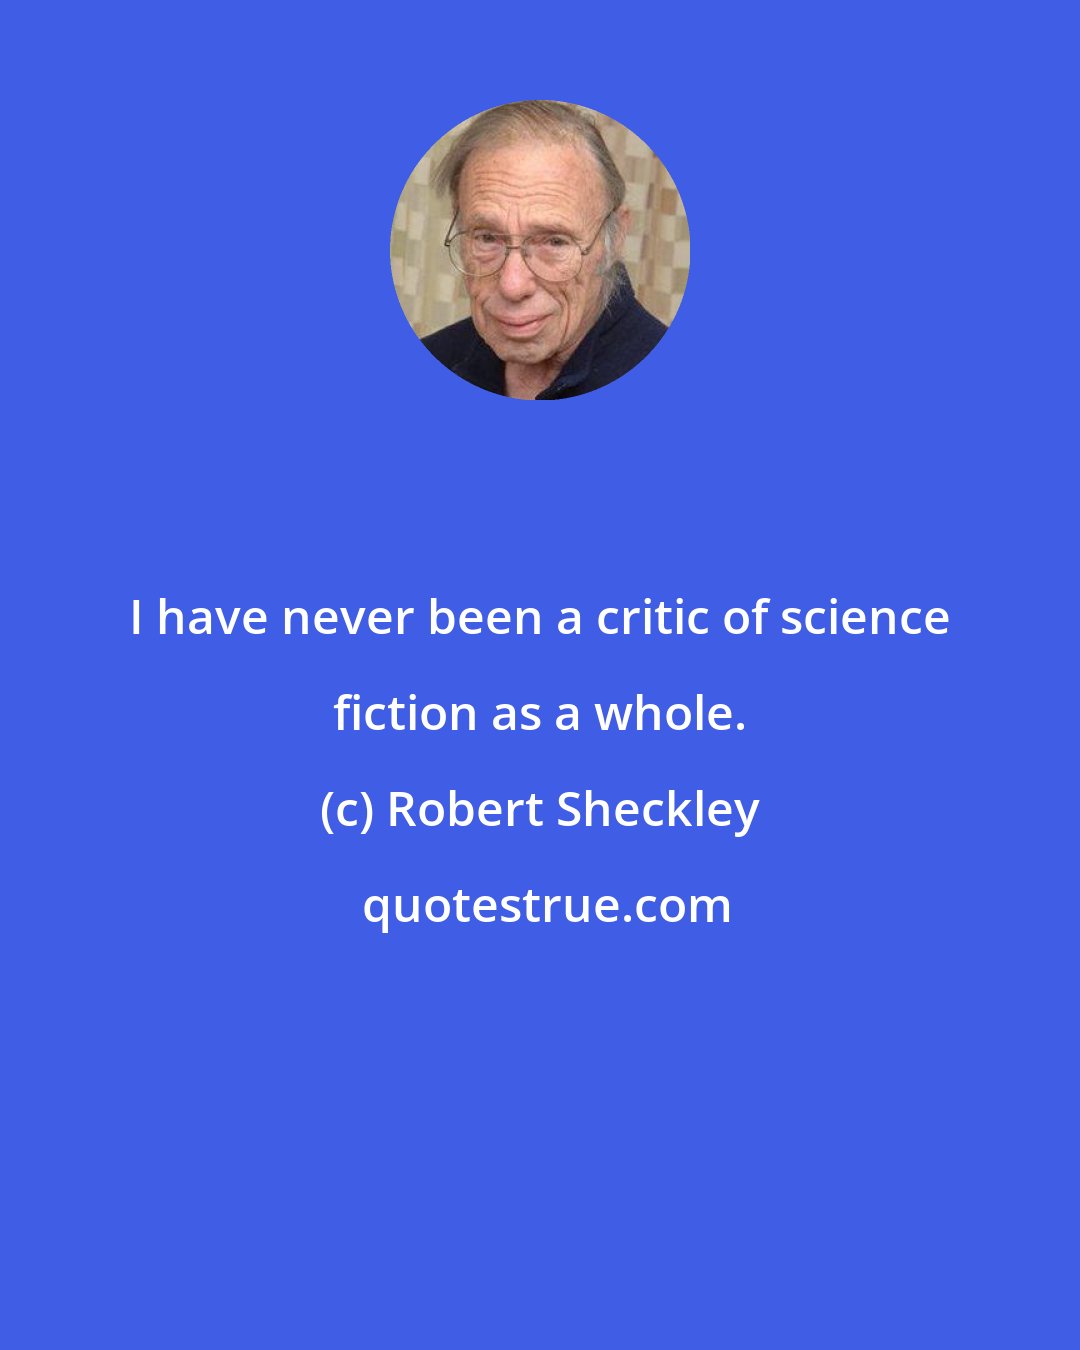 Robert Sheckley: I have never been a critic of science fiction as a whole.